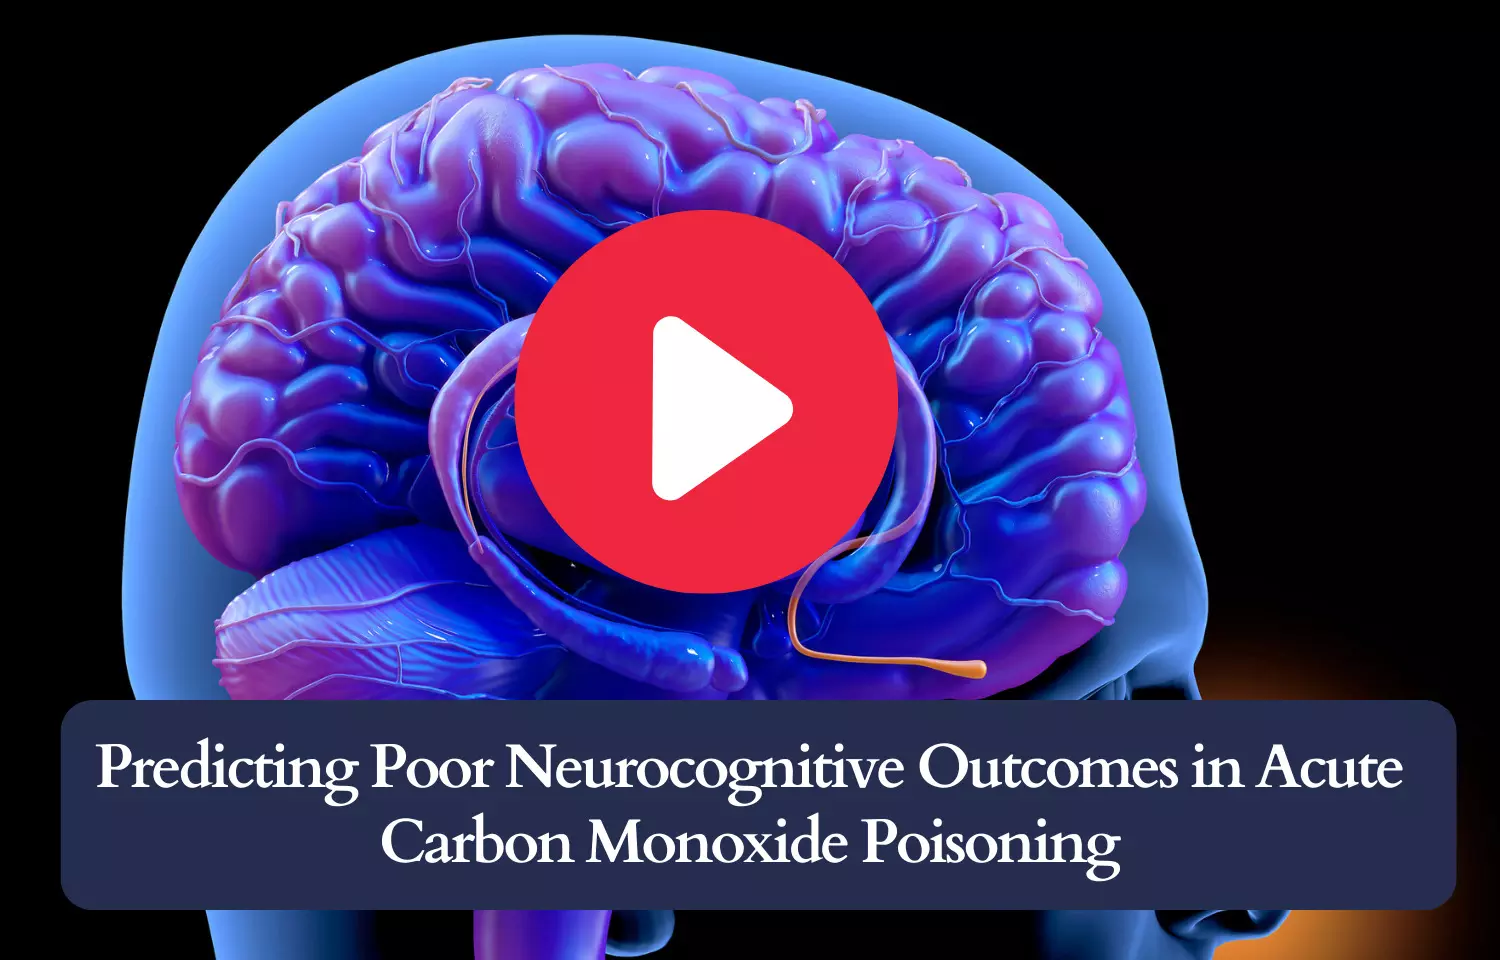 Predicting Poor Neurocognitive Outcomes in Acute Carbon Monoxide Poisoning